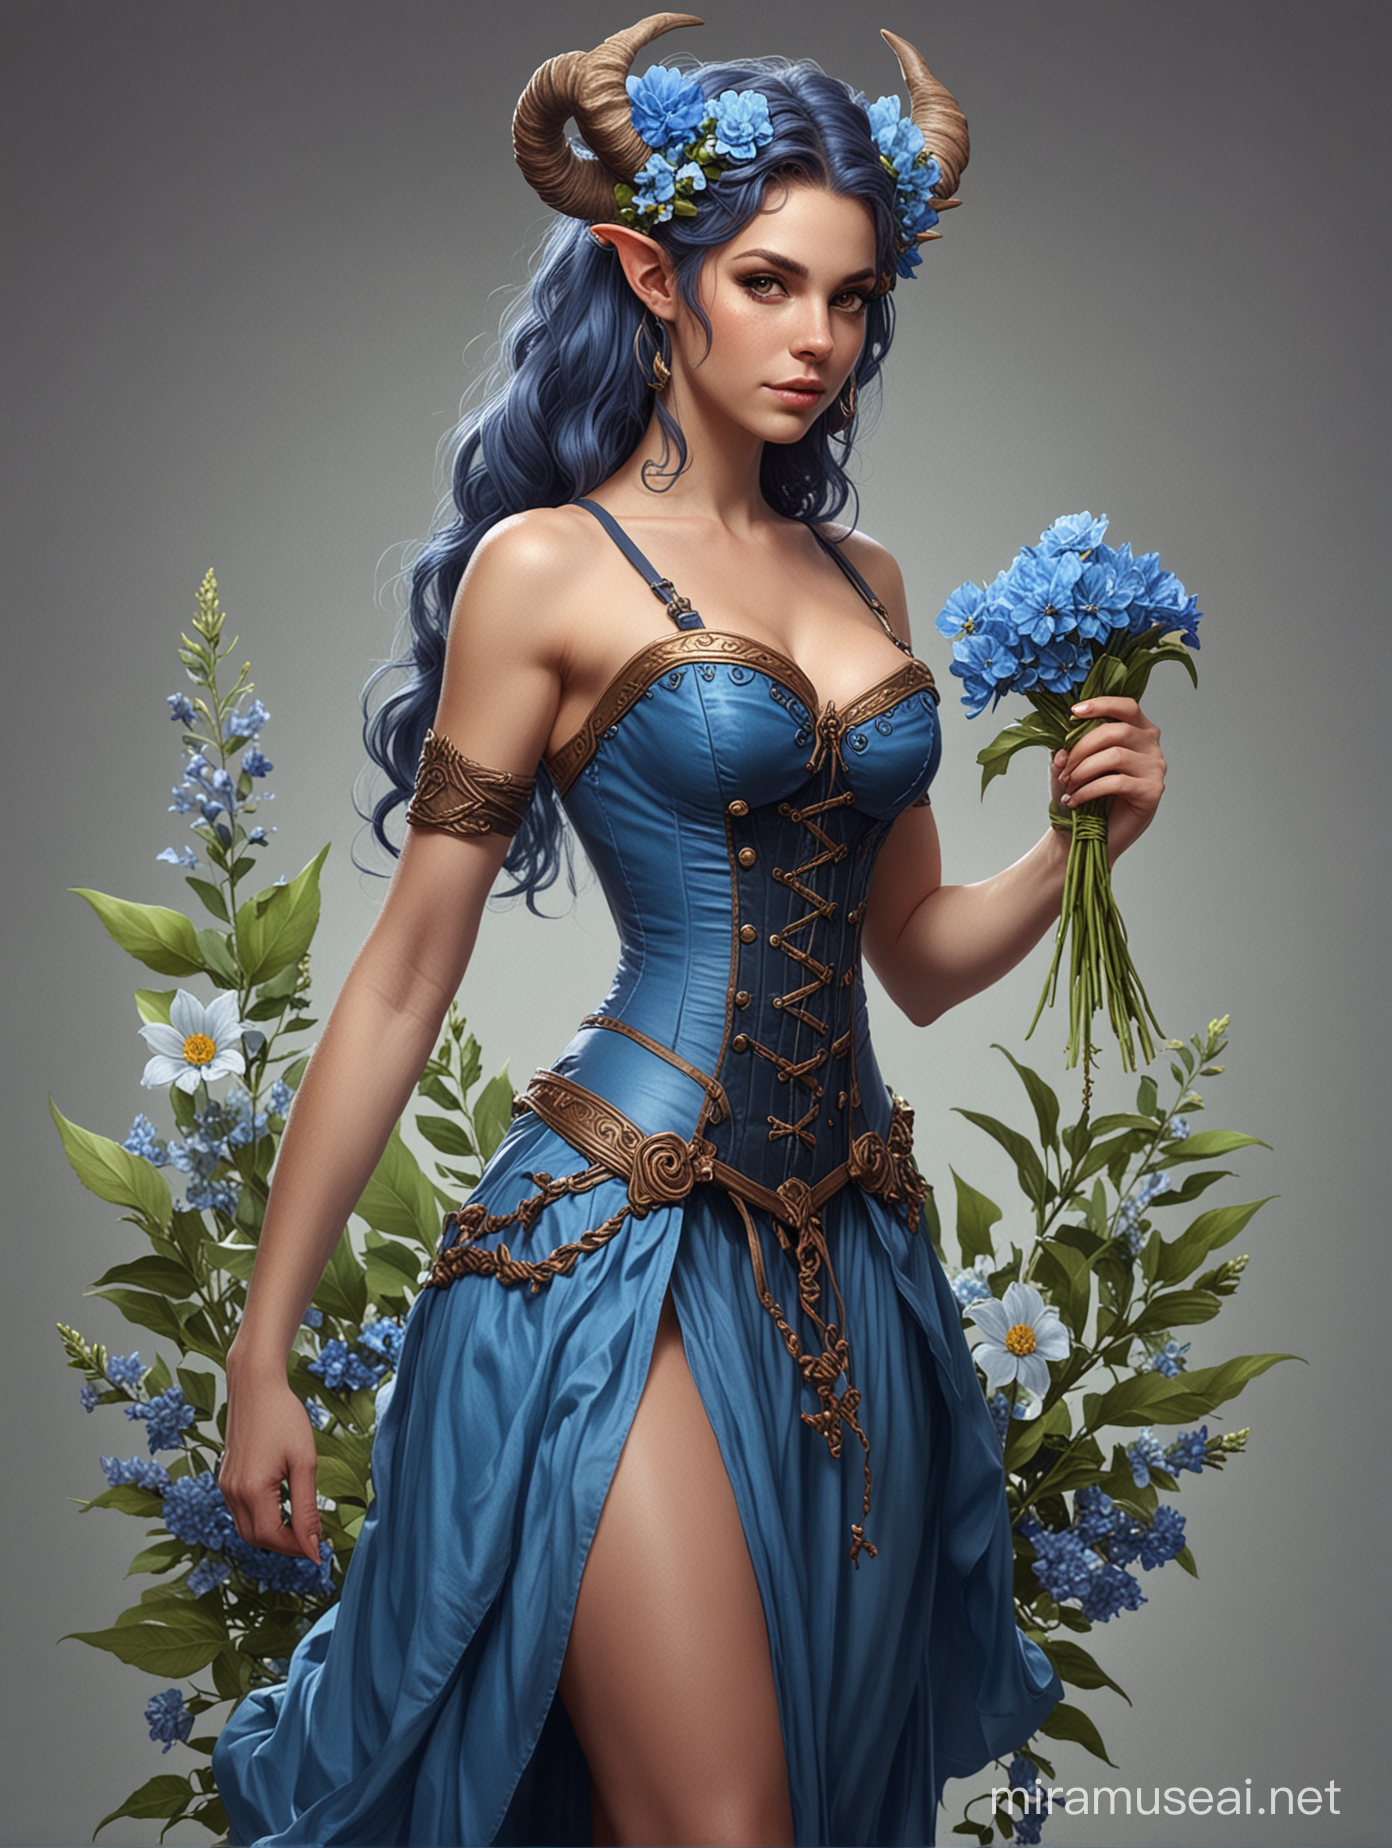 Female DnD satyr with blue corset dress and flowers in hair